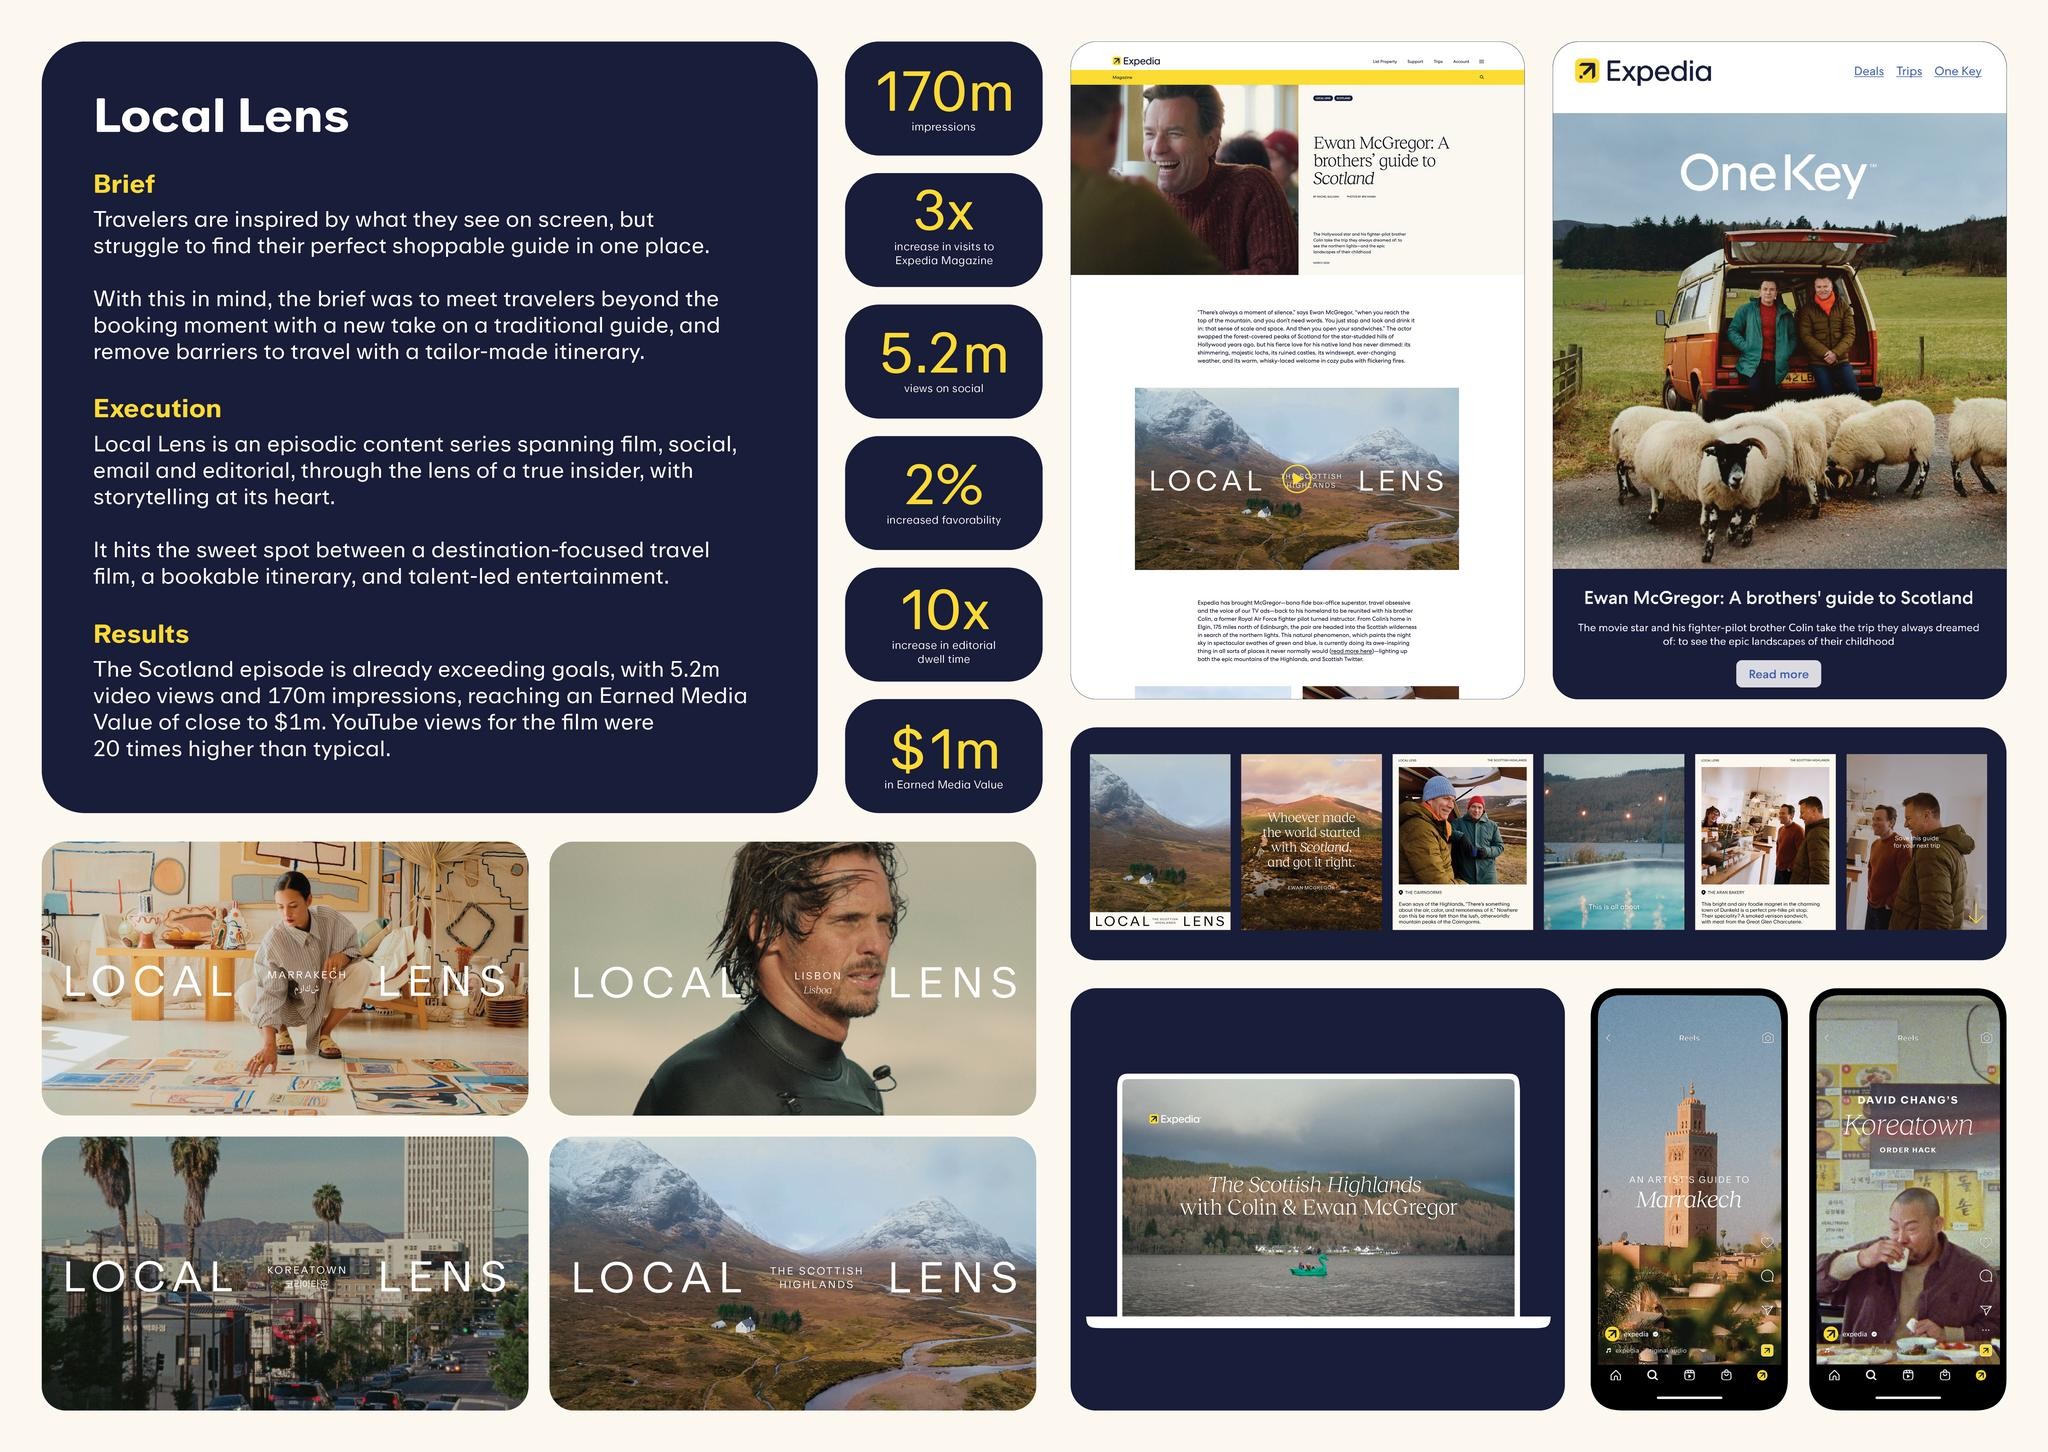 From inspiration to booking: Expedia’s ‘Local Lens’ Series